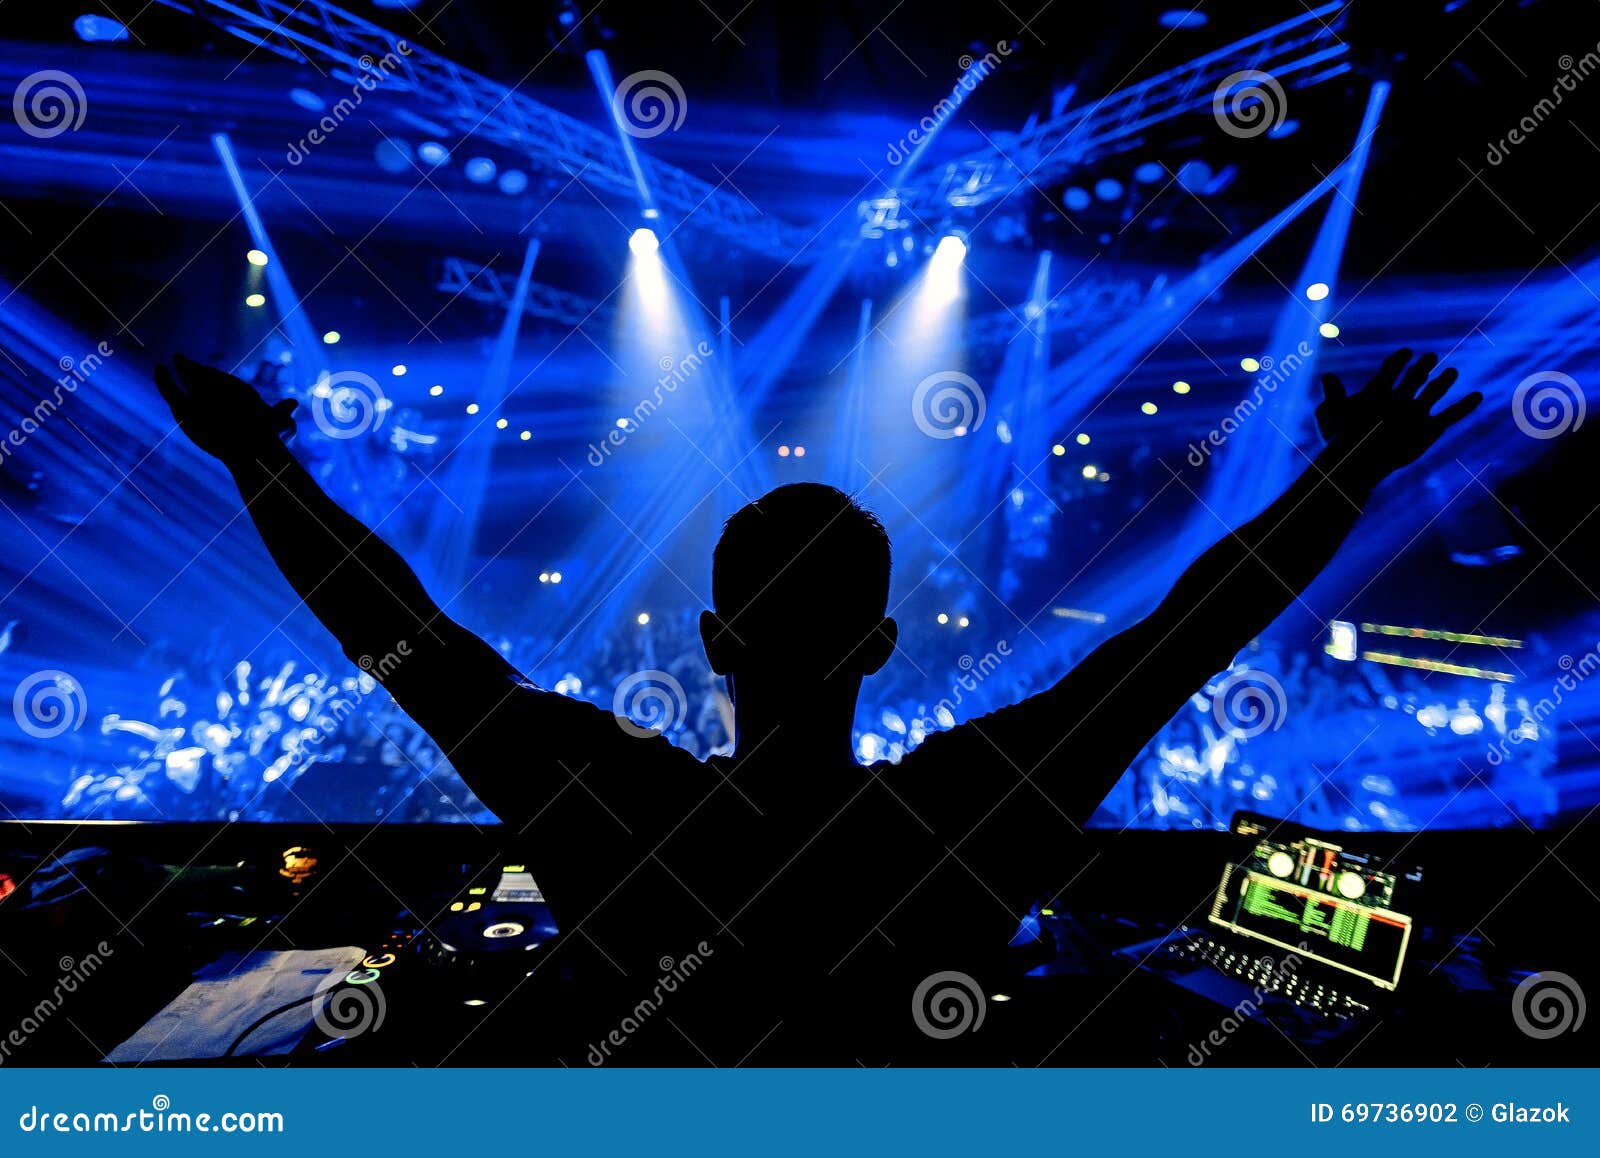 dj hands up at night club party under blue light with crowd of people